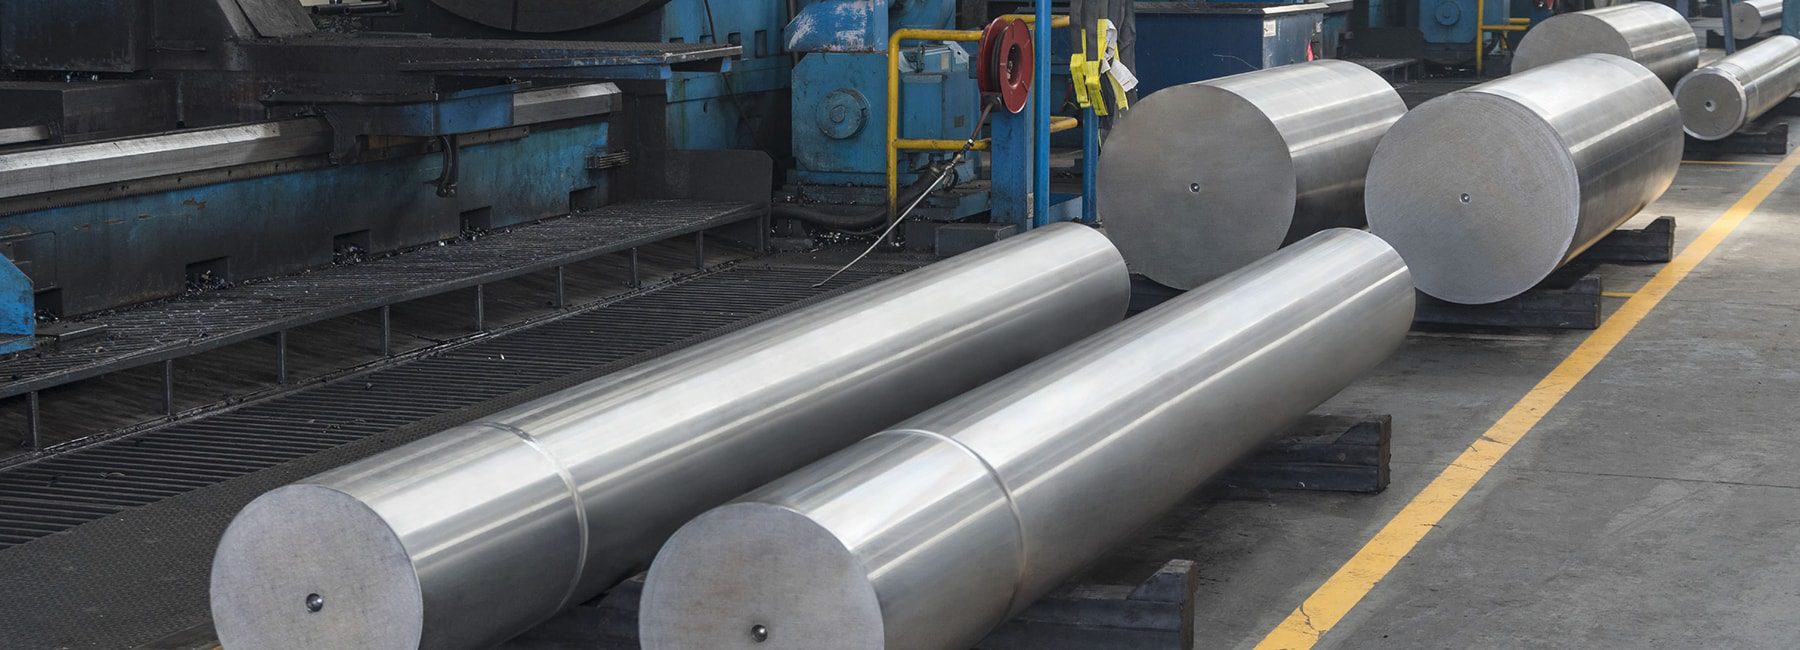 Large cylindrical metal parts on a factory floor, with industrial machinery in the background.